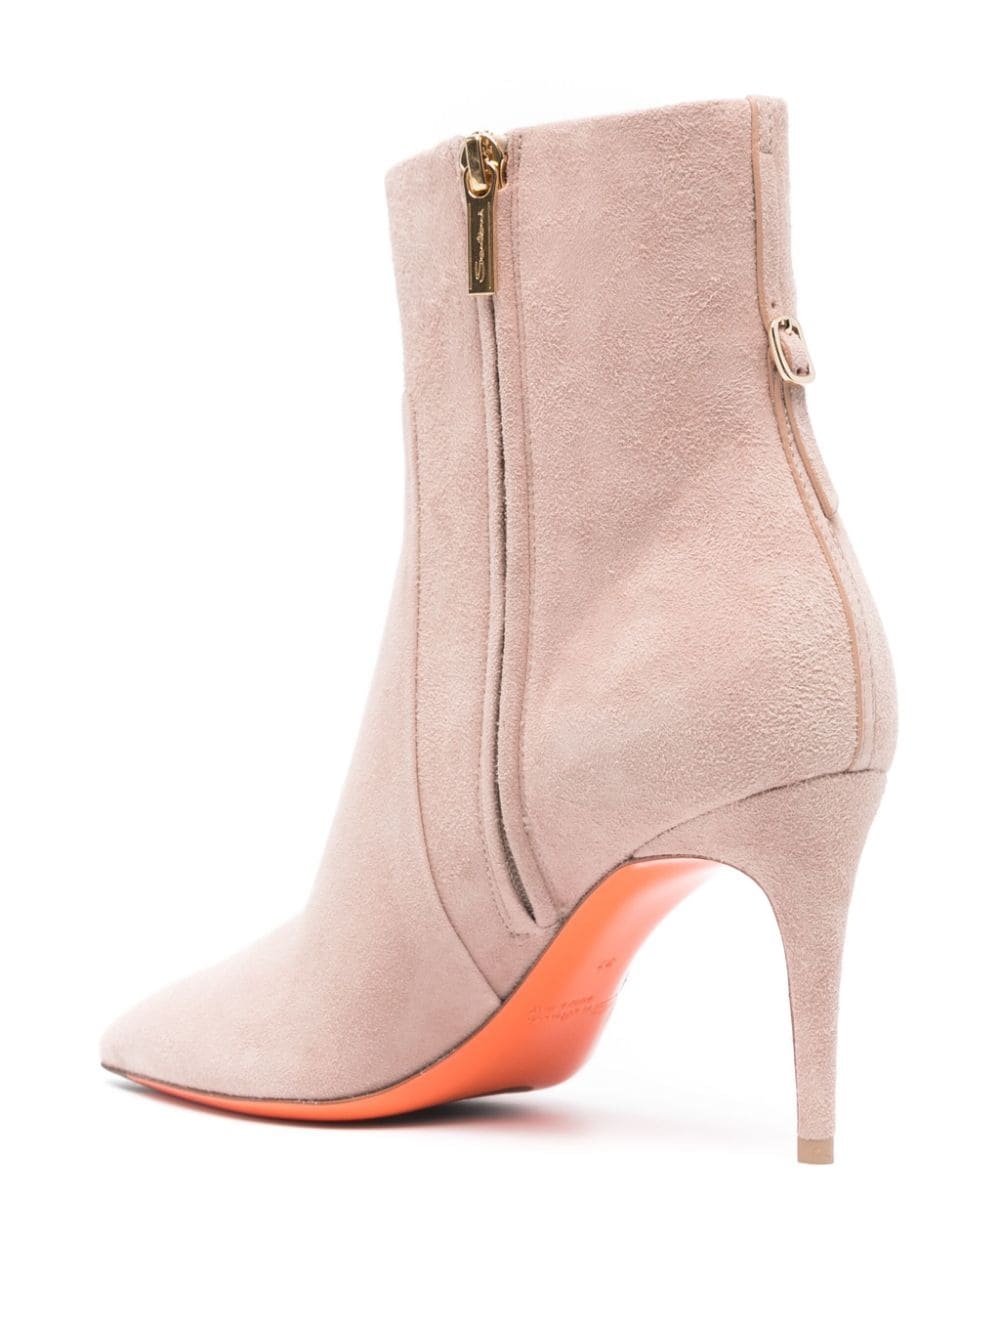 65mm suede ankle boots - 3